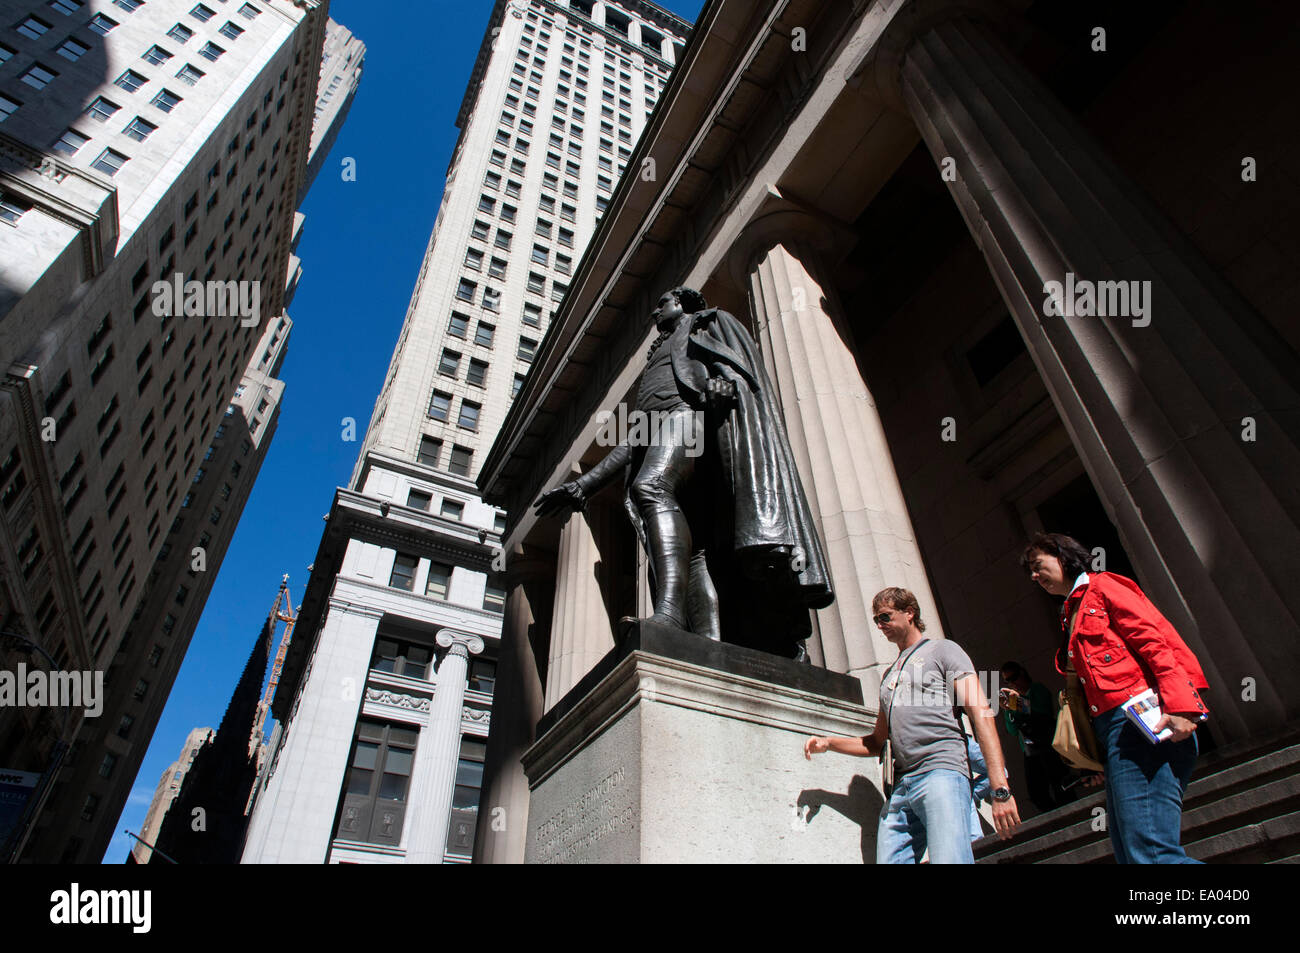 Statue of George Washington. Statue of George Washington in front of Federal Hall on Wall Street, Lower Manhattan, New York City Stock Photo